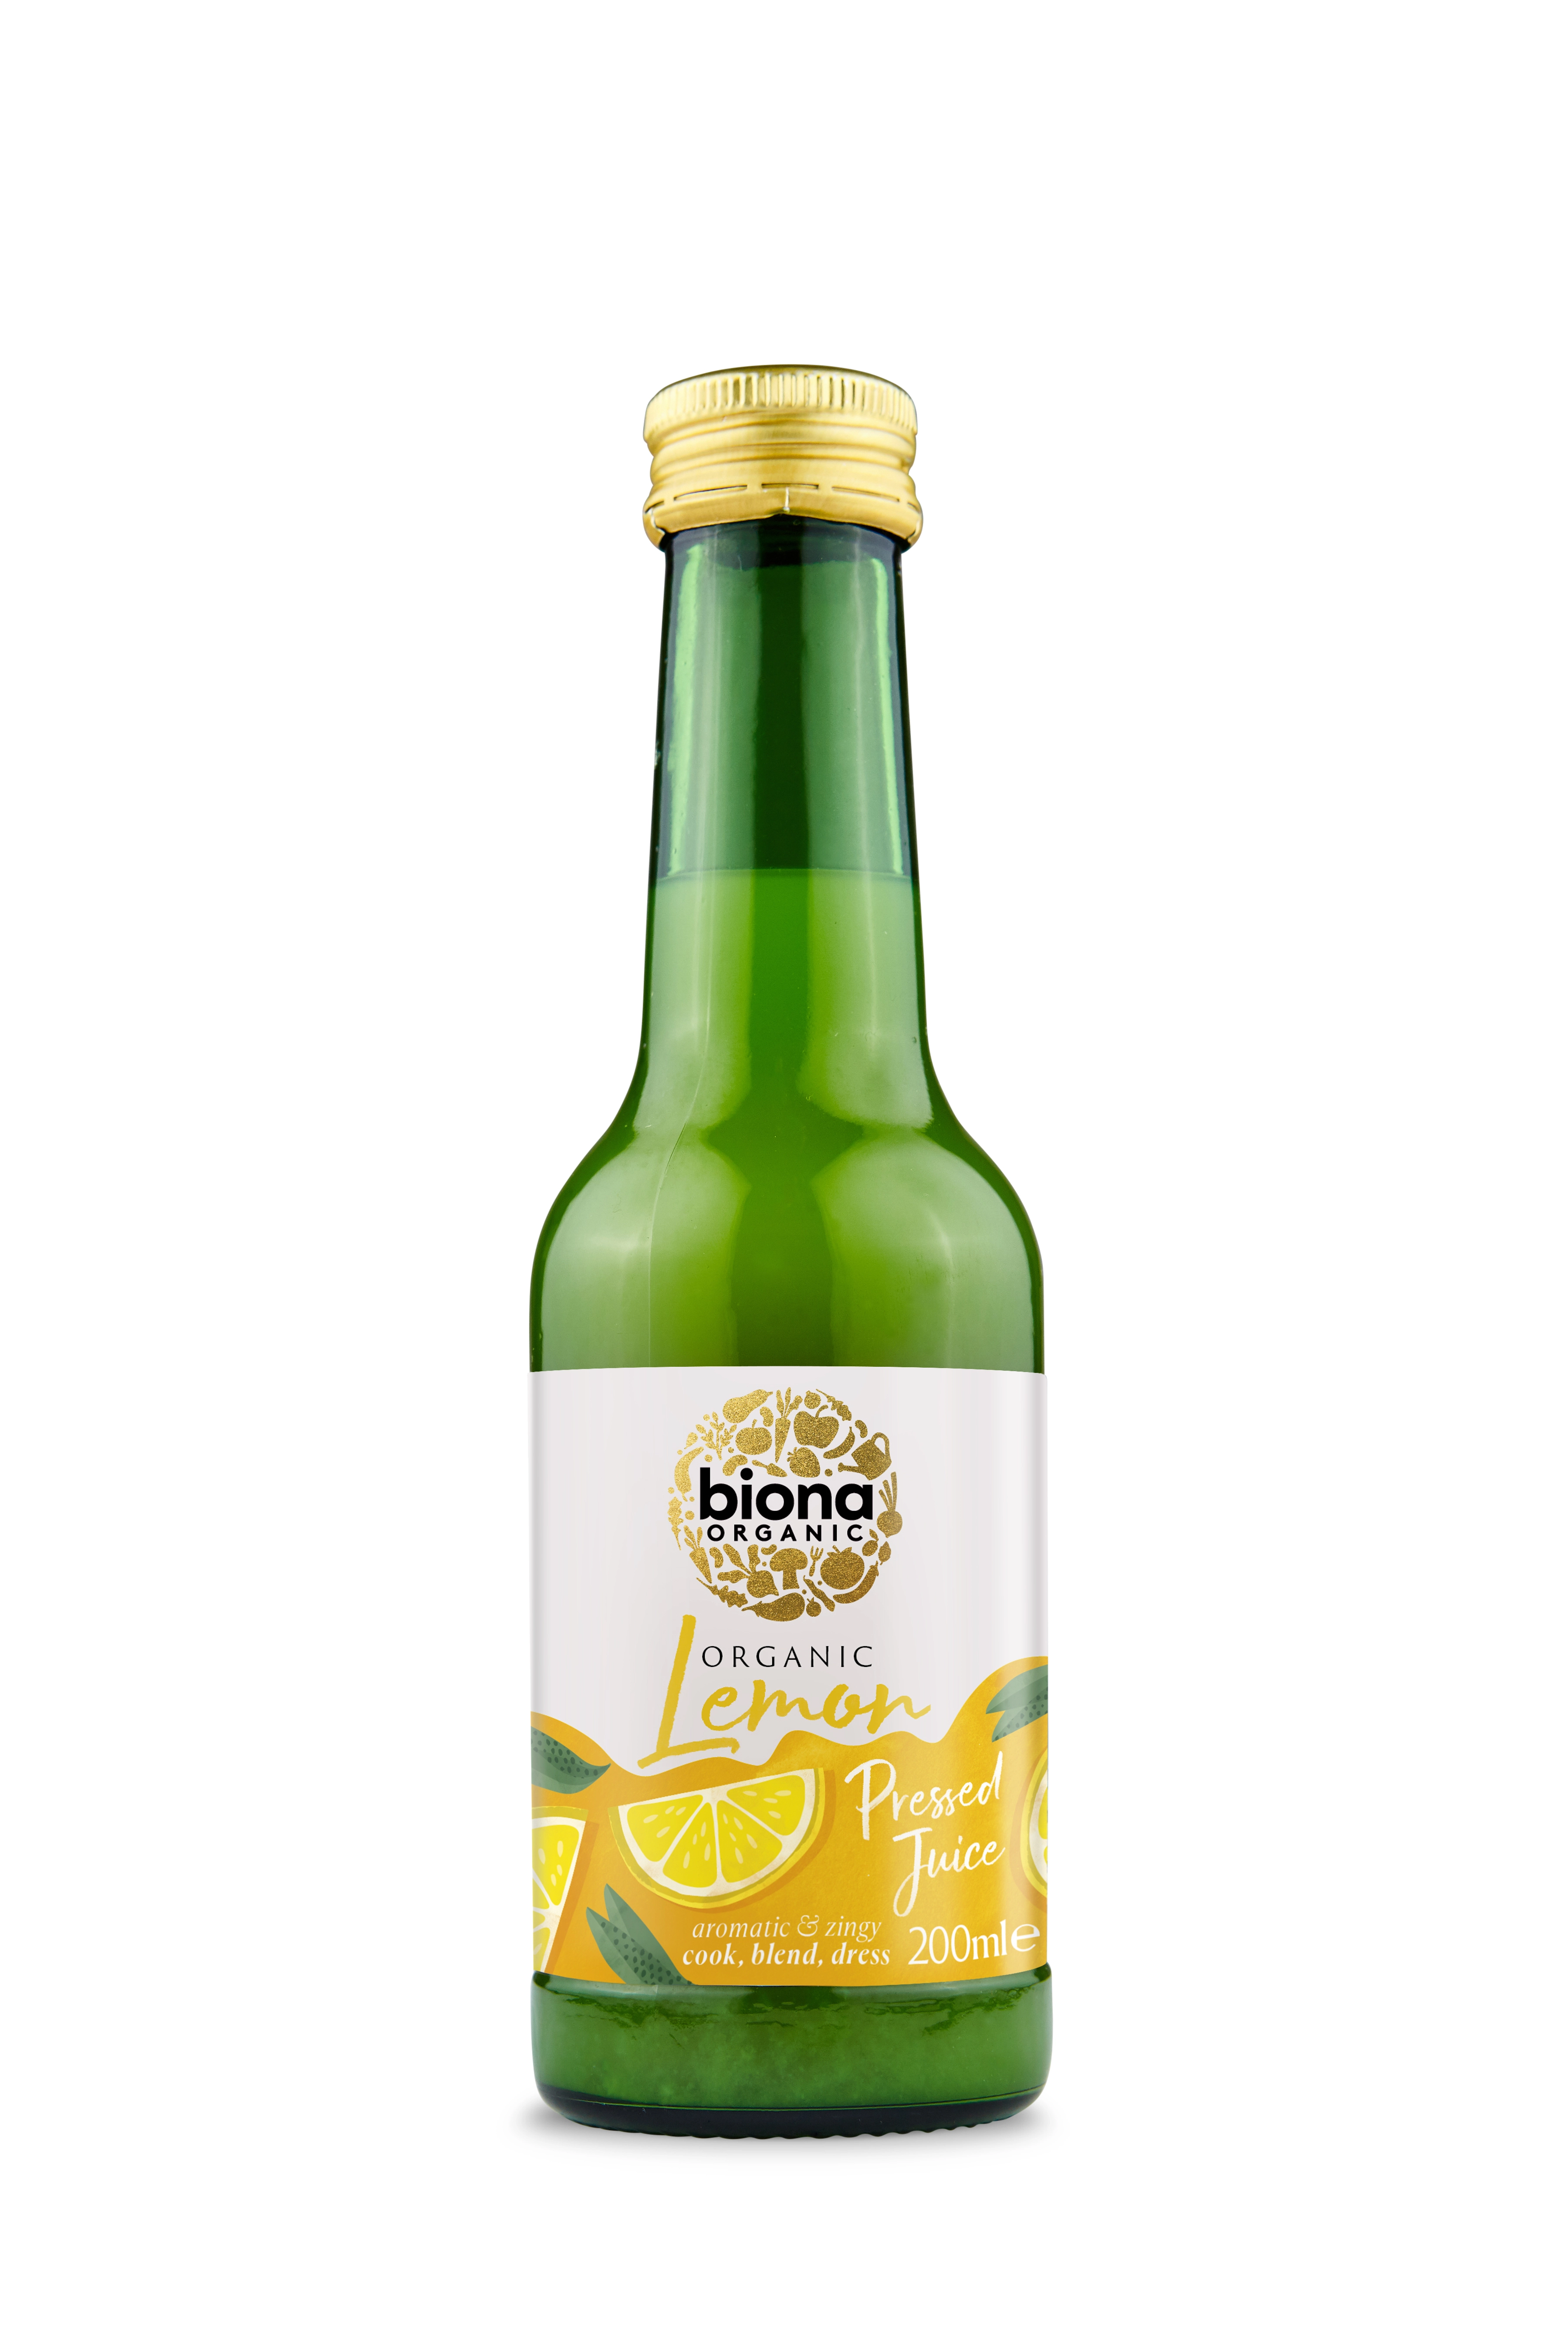 Biona Organic Lemon Juice - Not from concentrate 200ml